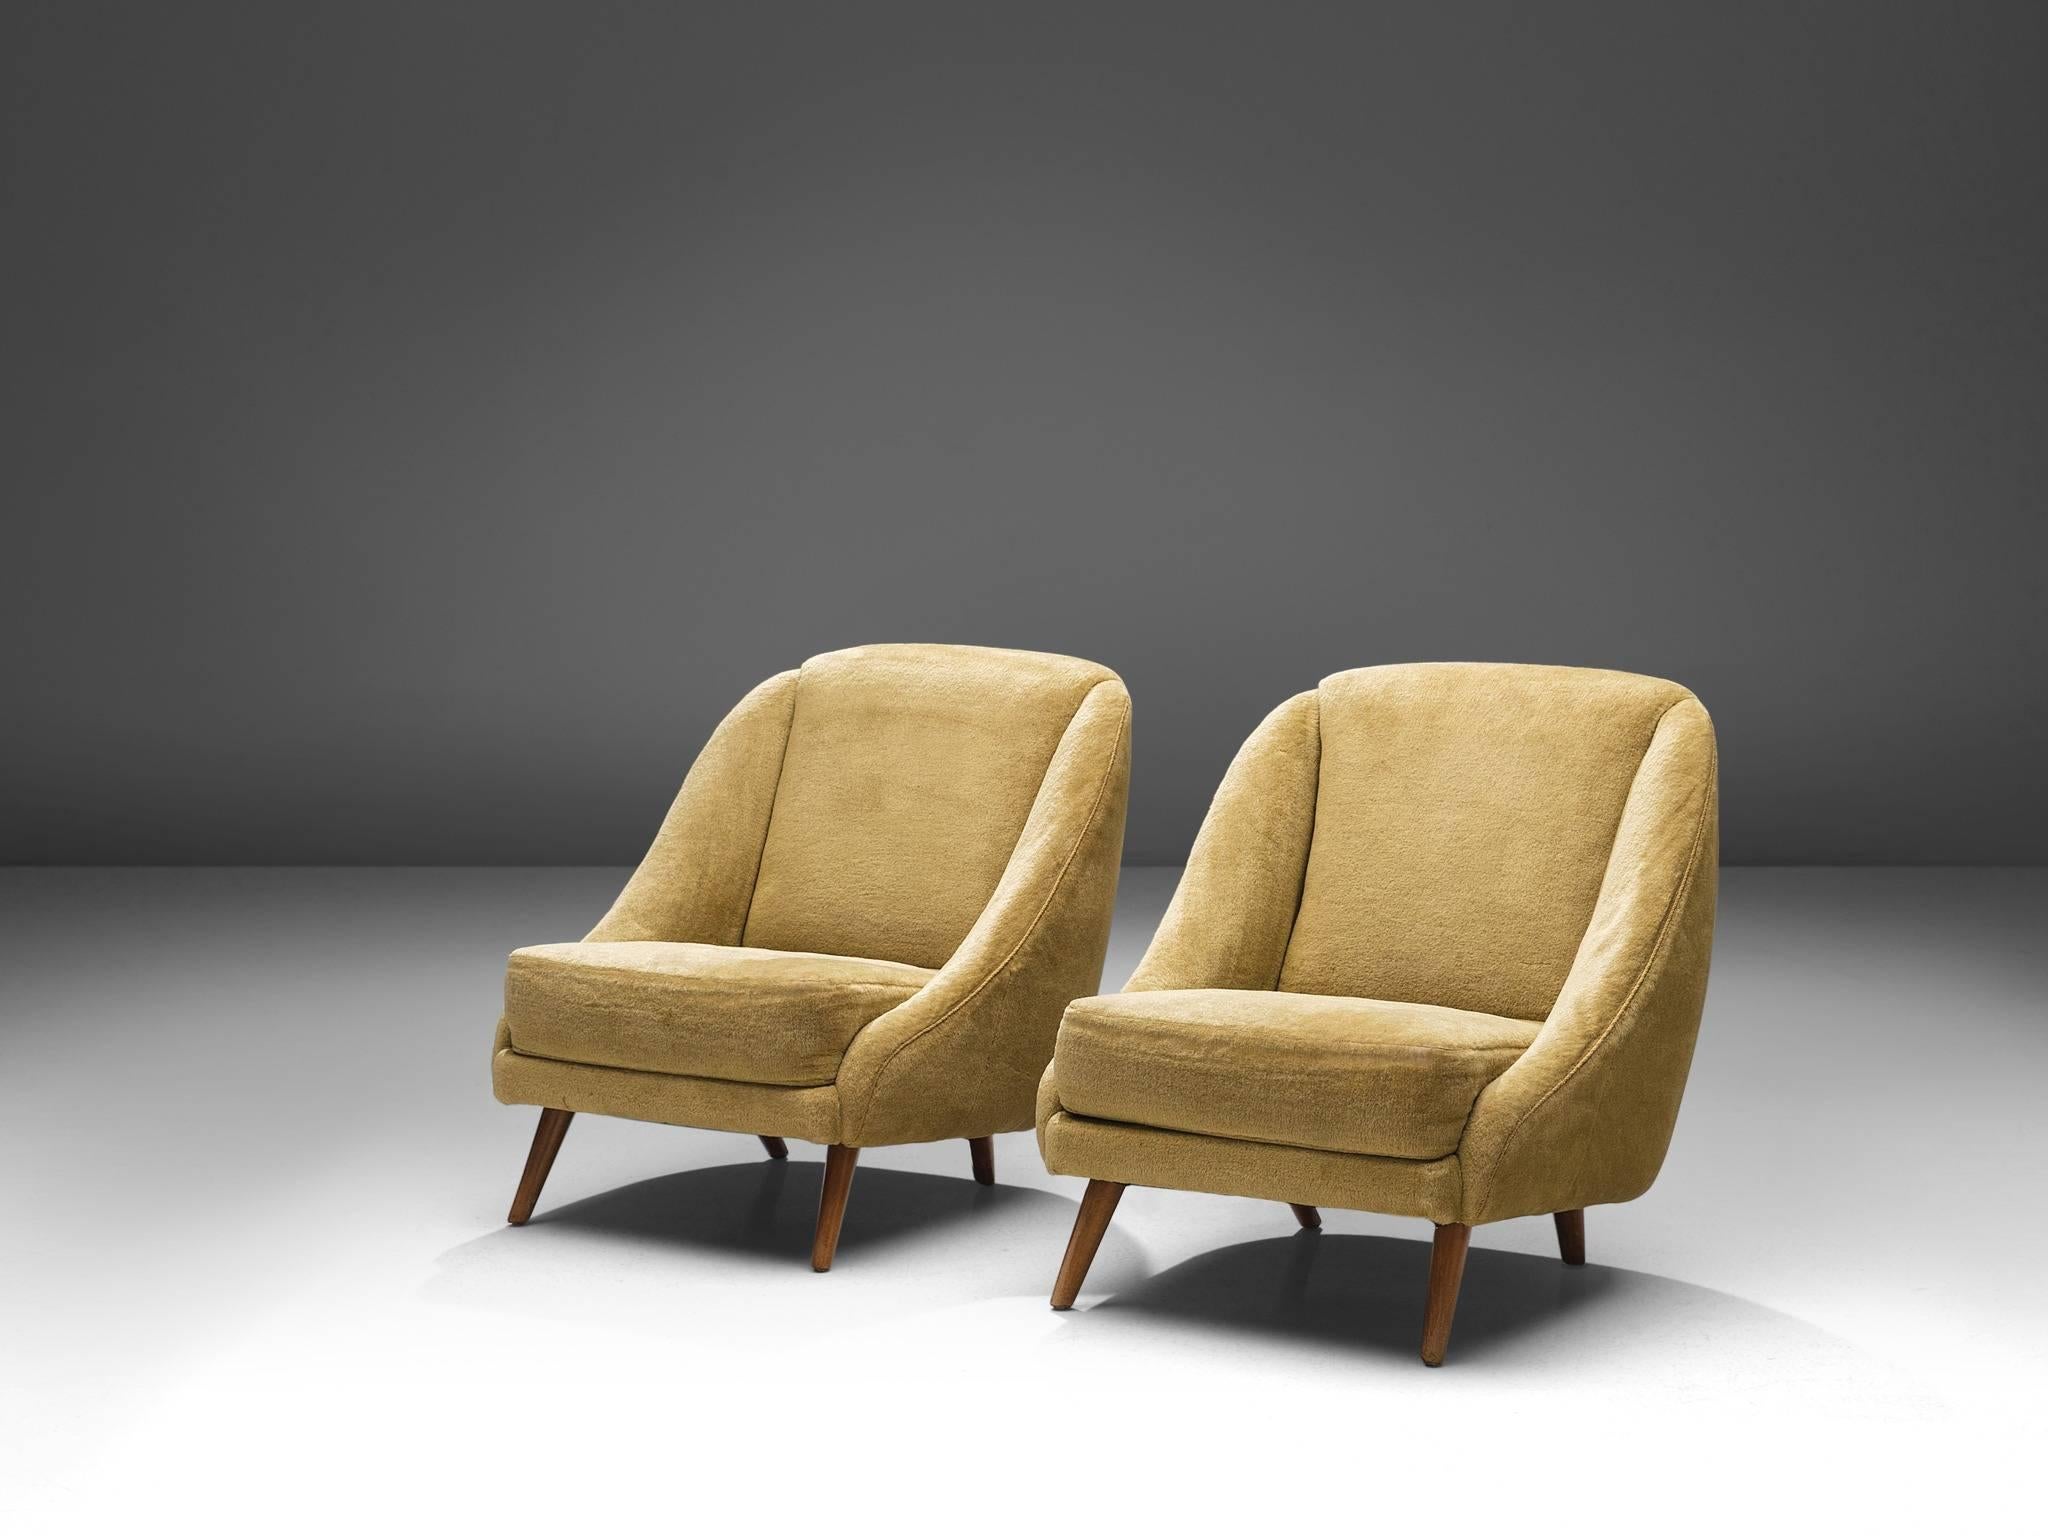 Pair of armchairs, beige fabric, beech, France, 1950s. 

These elegant lounge chairs are designed by a French cabinet maker. The item holds simplistic design, with stunning aesthetic details. The chair is soft and rounded with sloping armrest. The